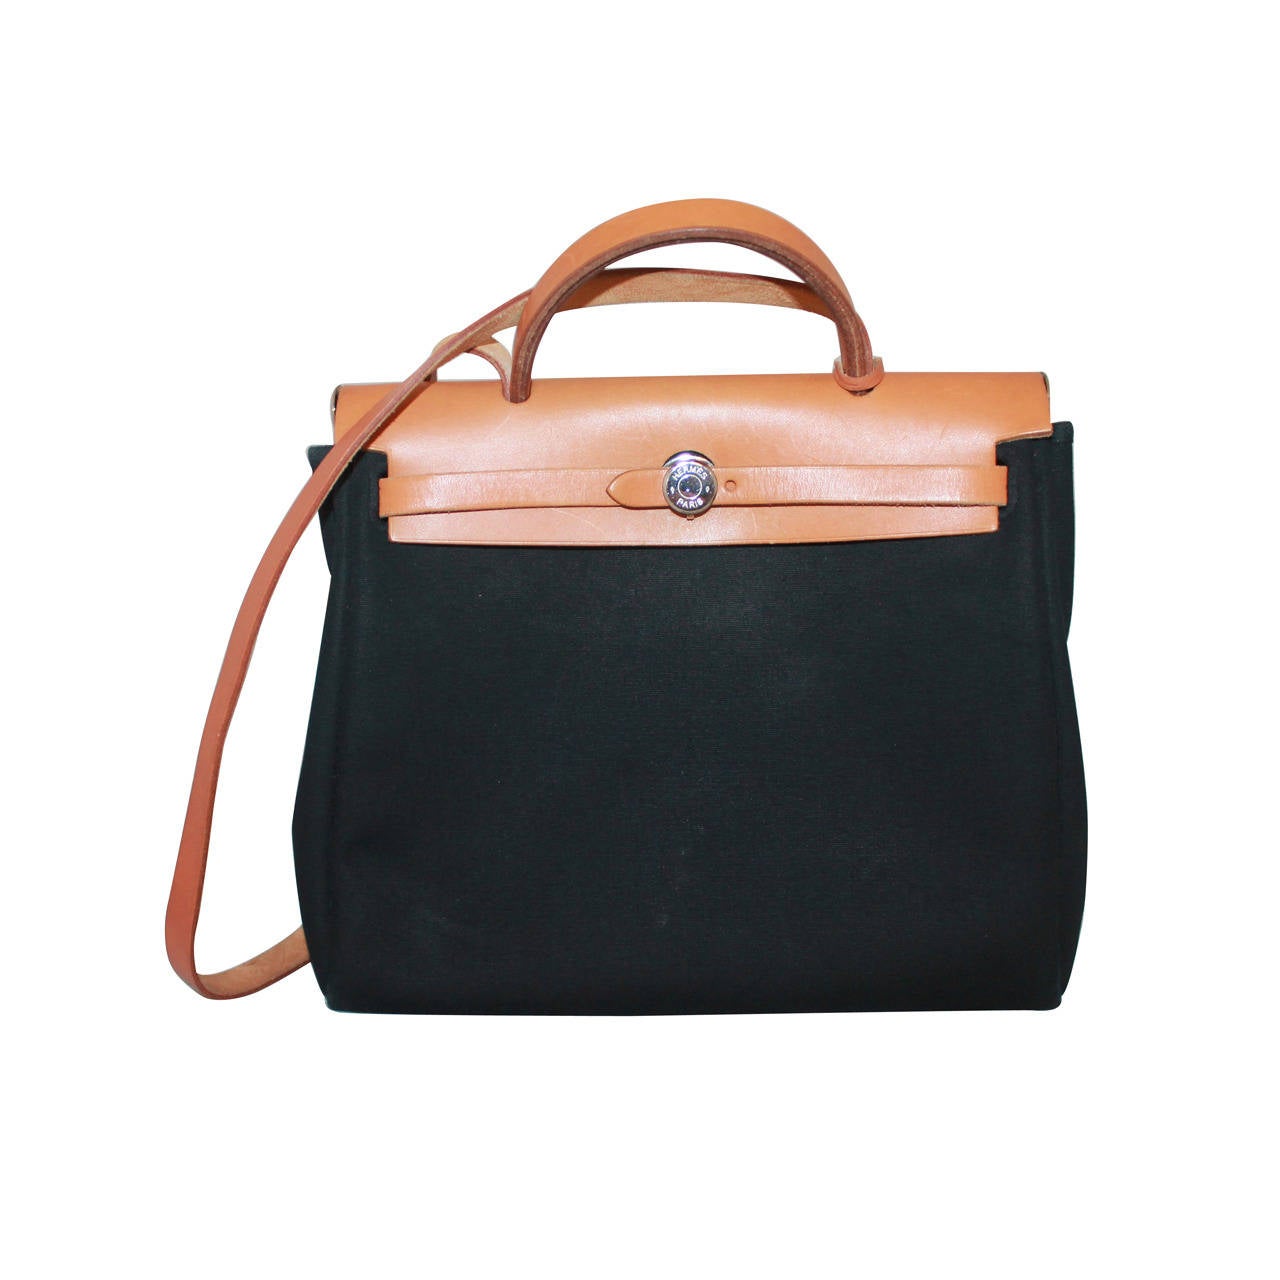 Hermes Gold Leather Tan and Black Canvas &quot;Her&quot; Bag 31 cm at 1stdibs